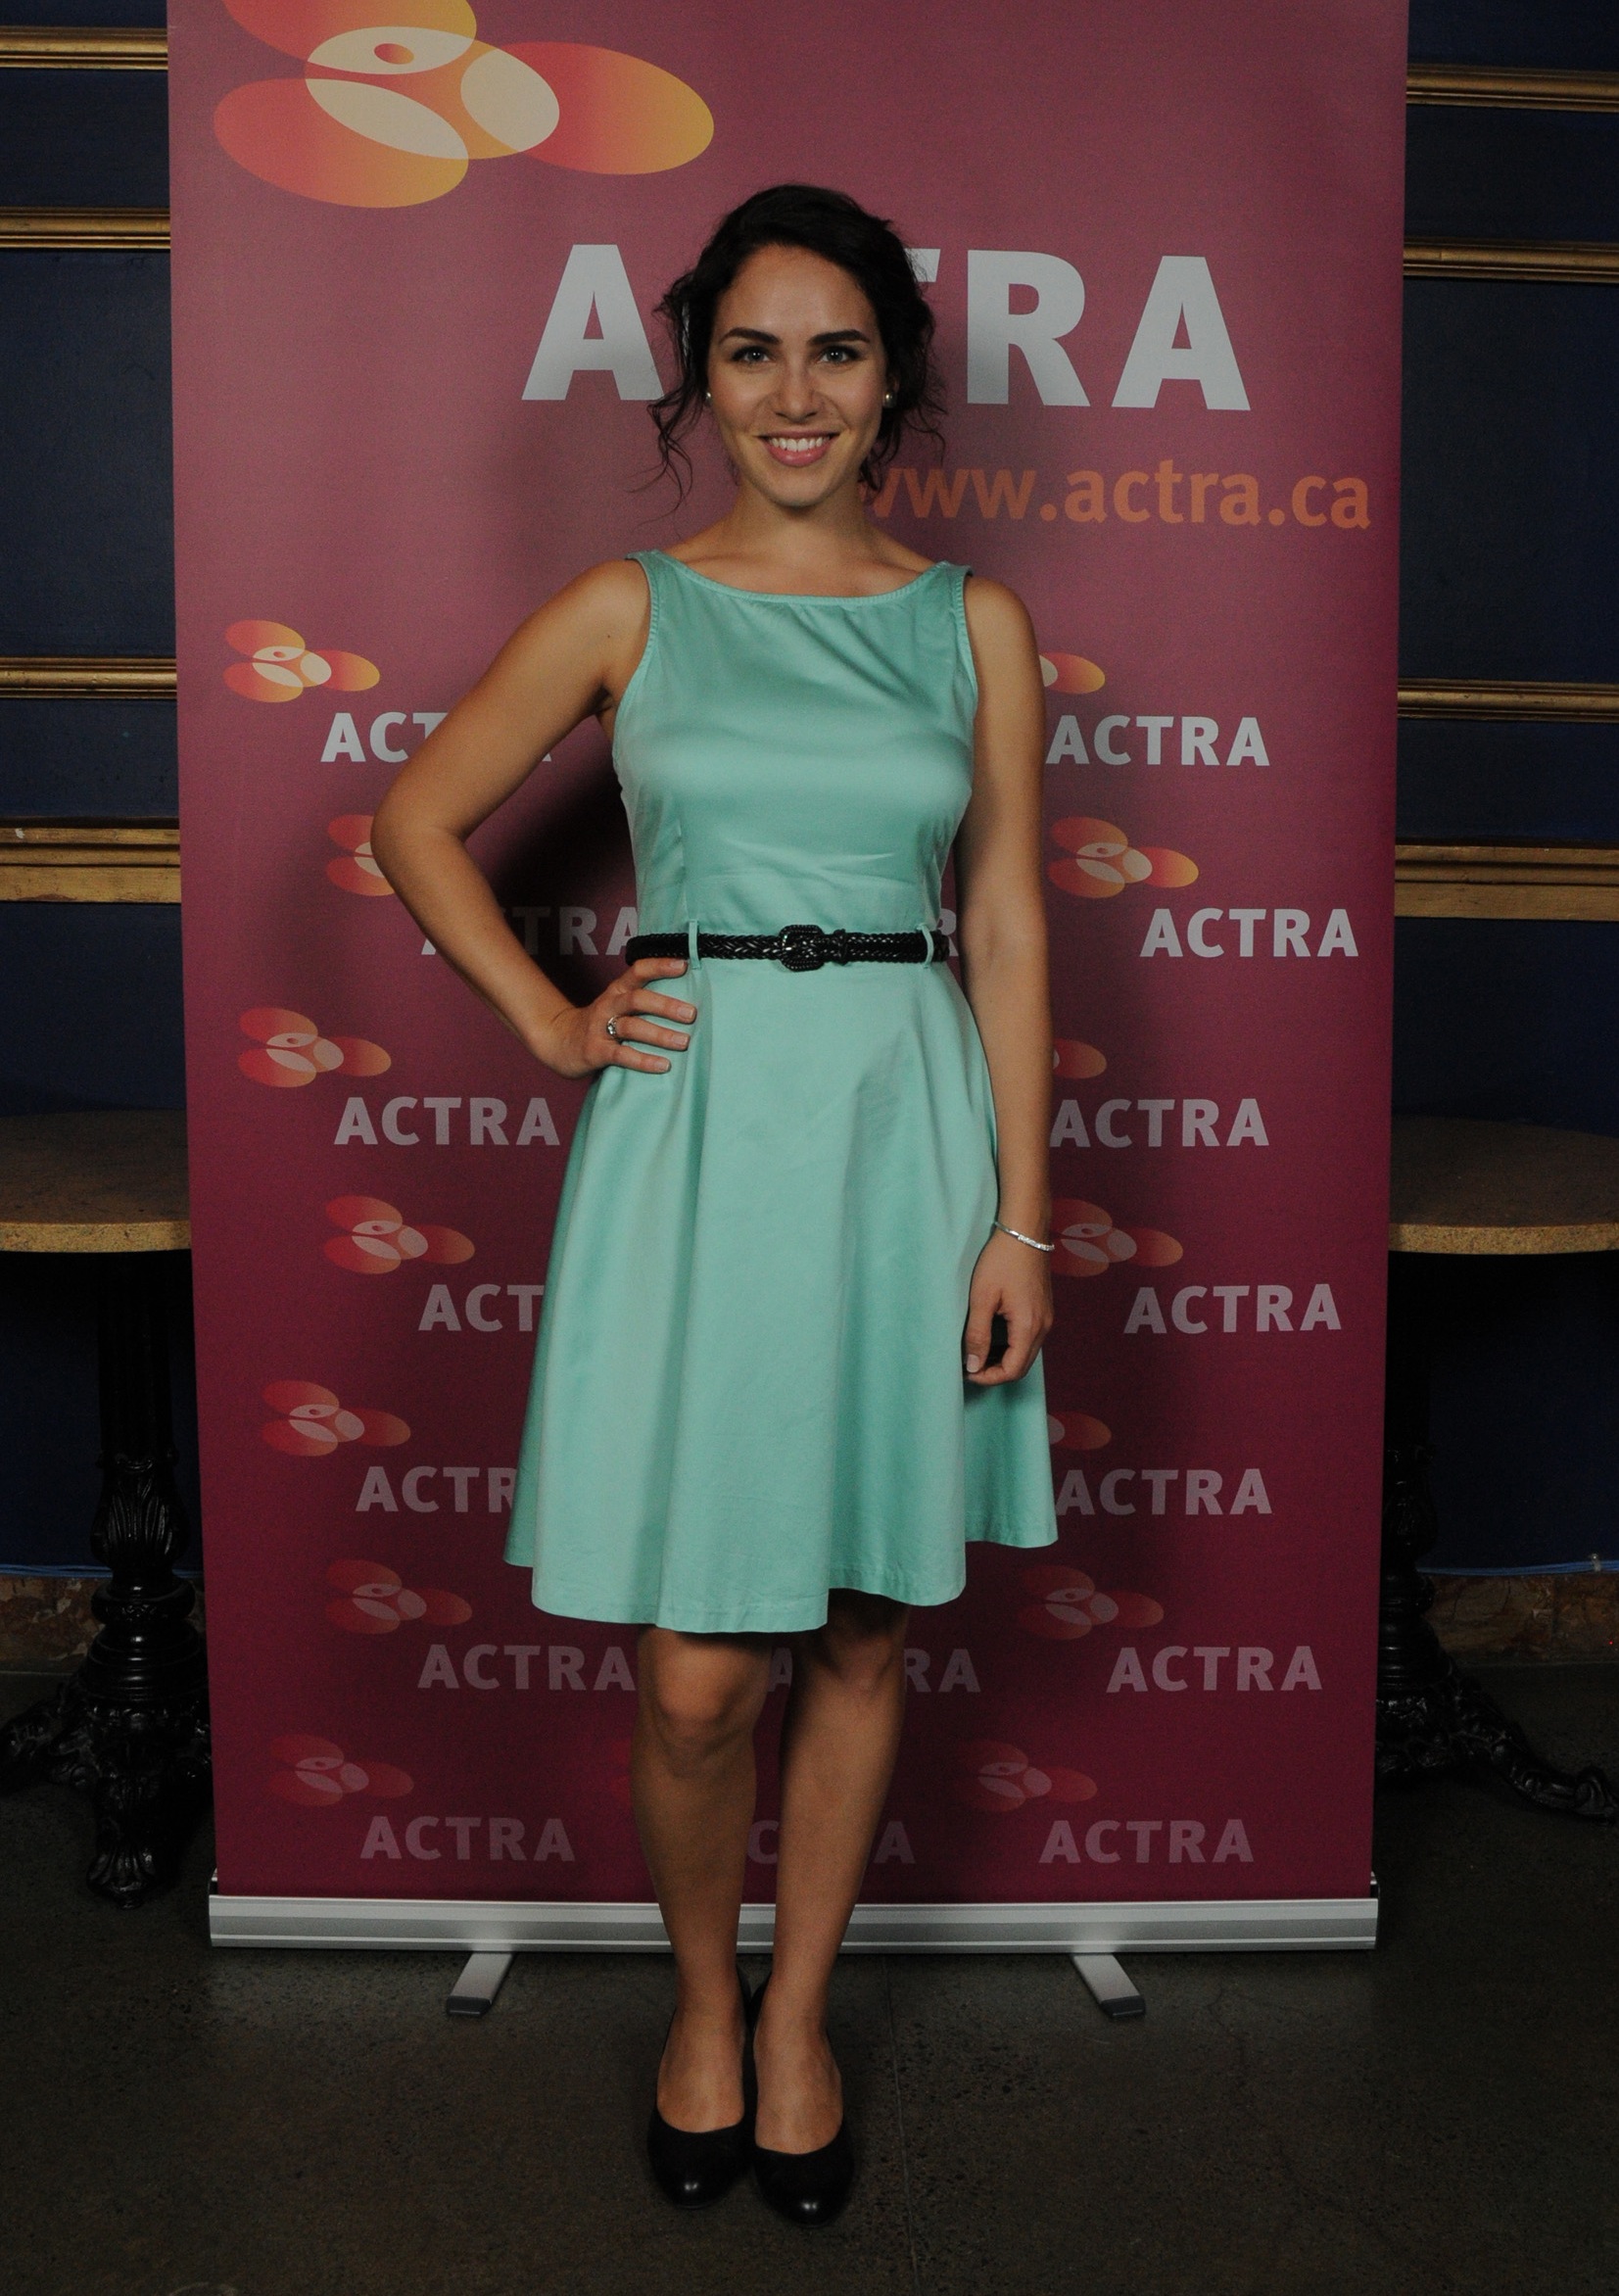 2013 Montreal ACTRA Awards Nominee Amber Goldfarb, Outstanding Performance in a video game (Assassin's Creed III: Liberation)